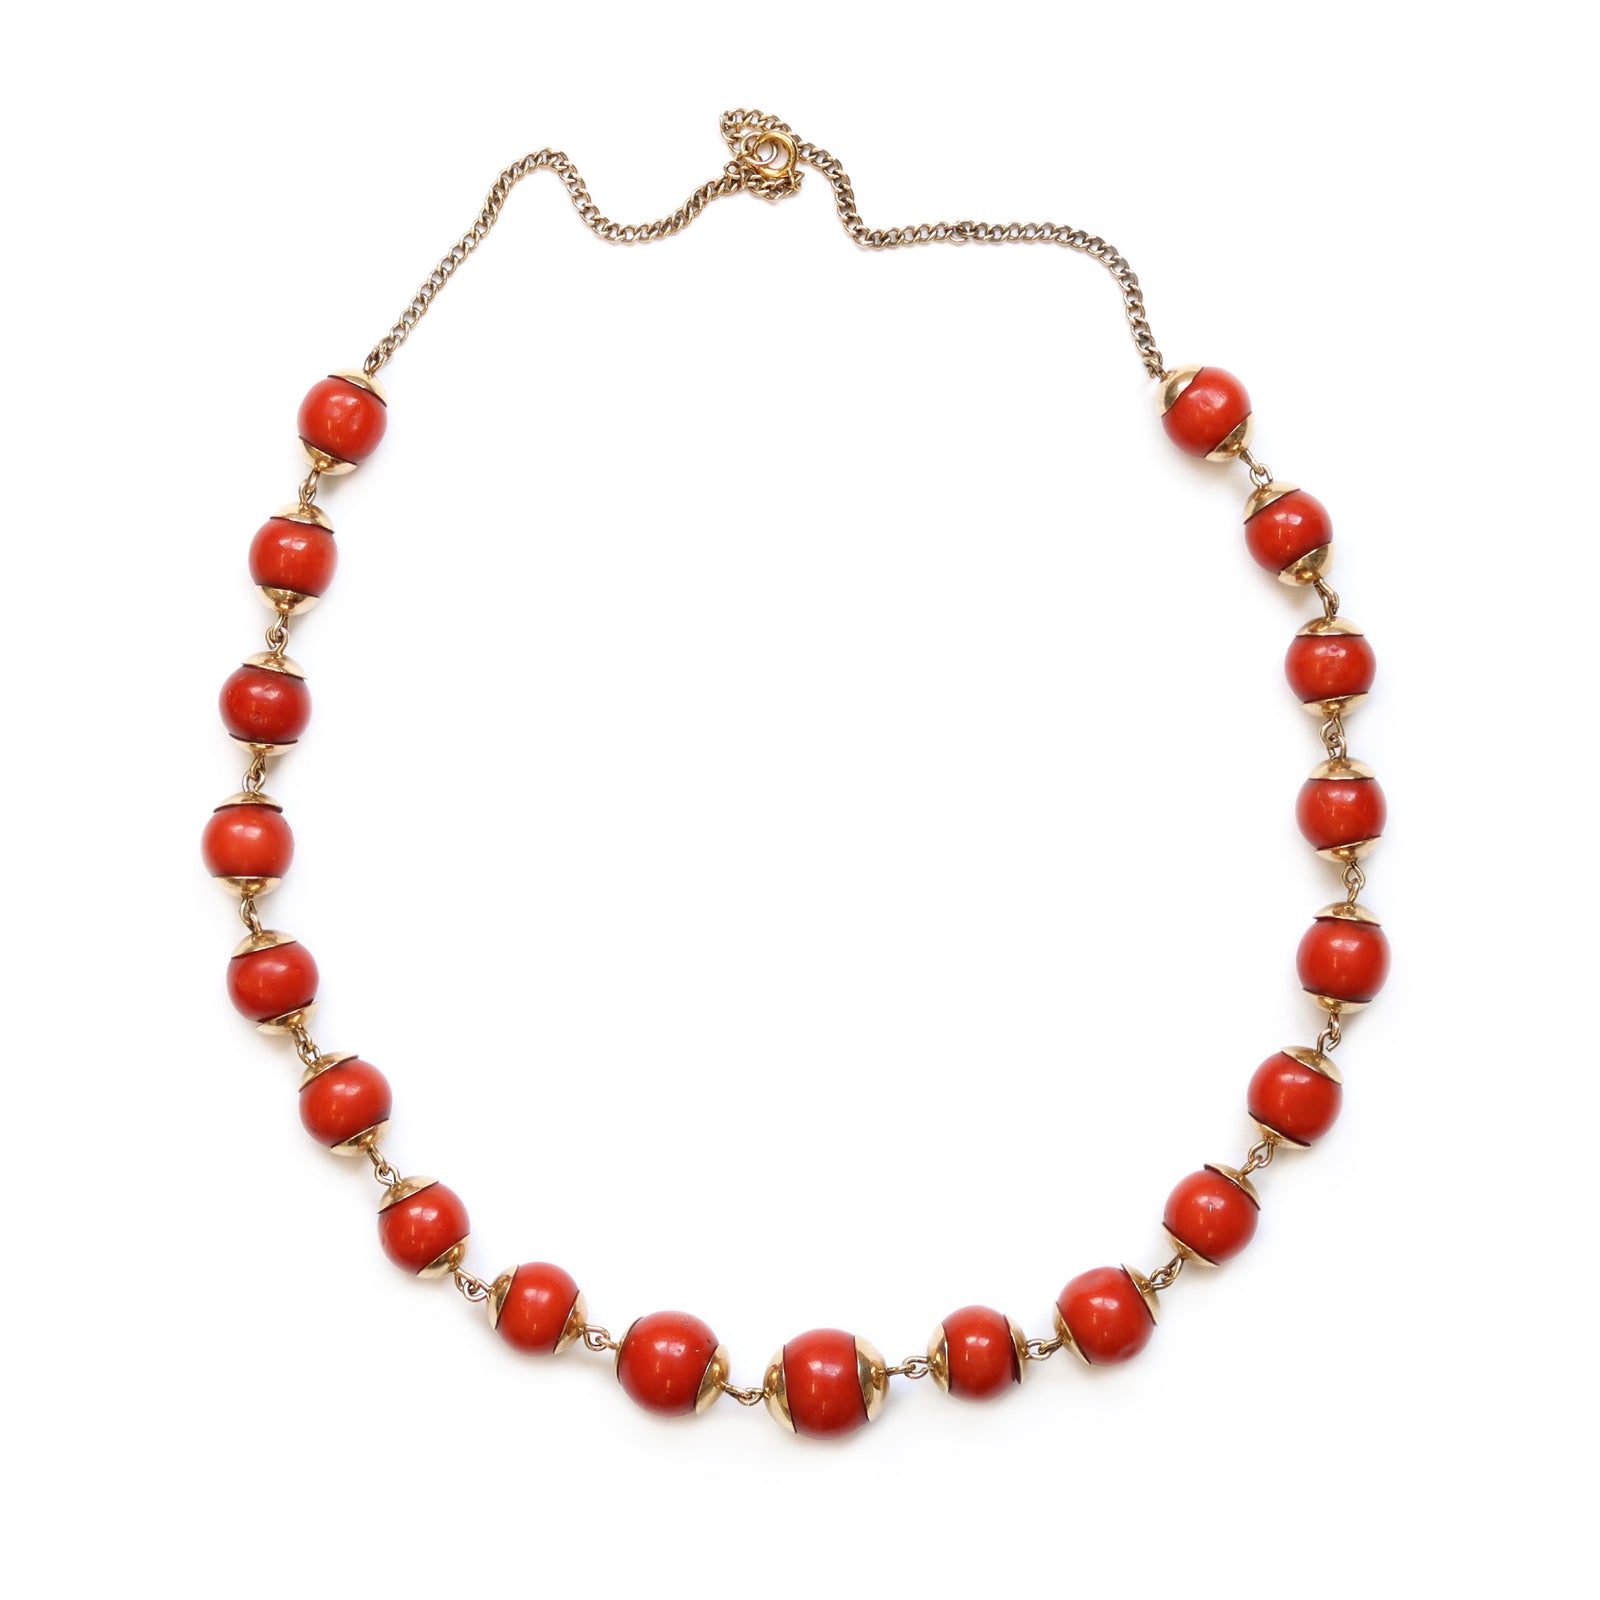 Red Mediterranean coral necklace with a carved coral clasp, 18 kt